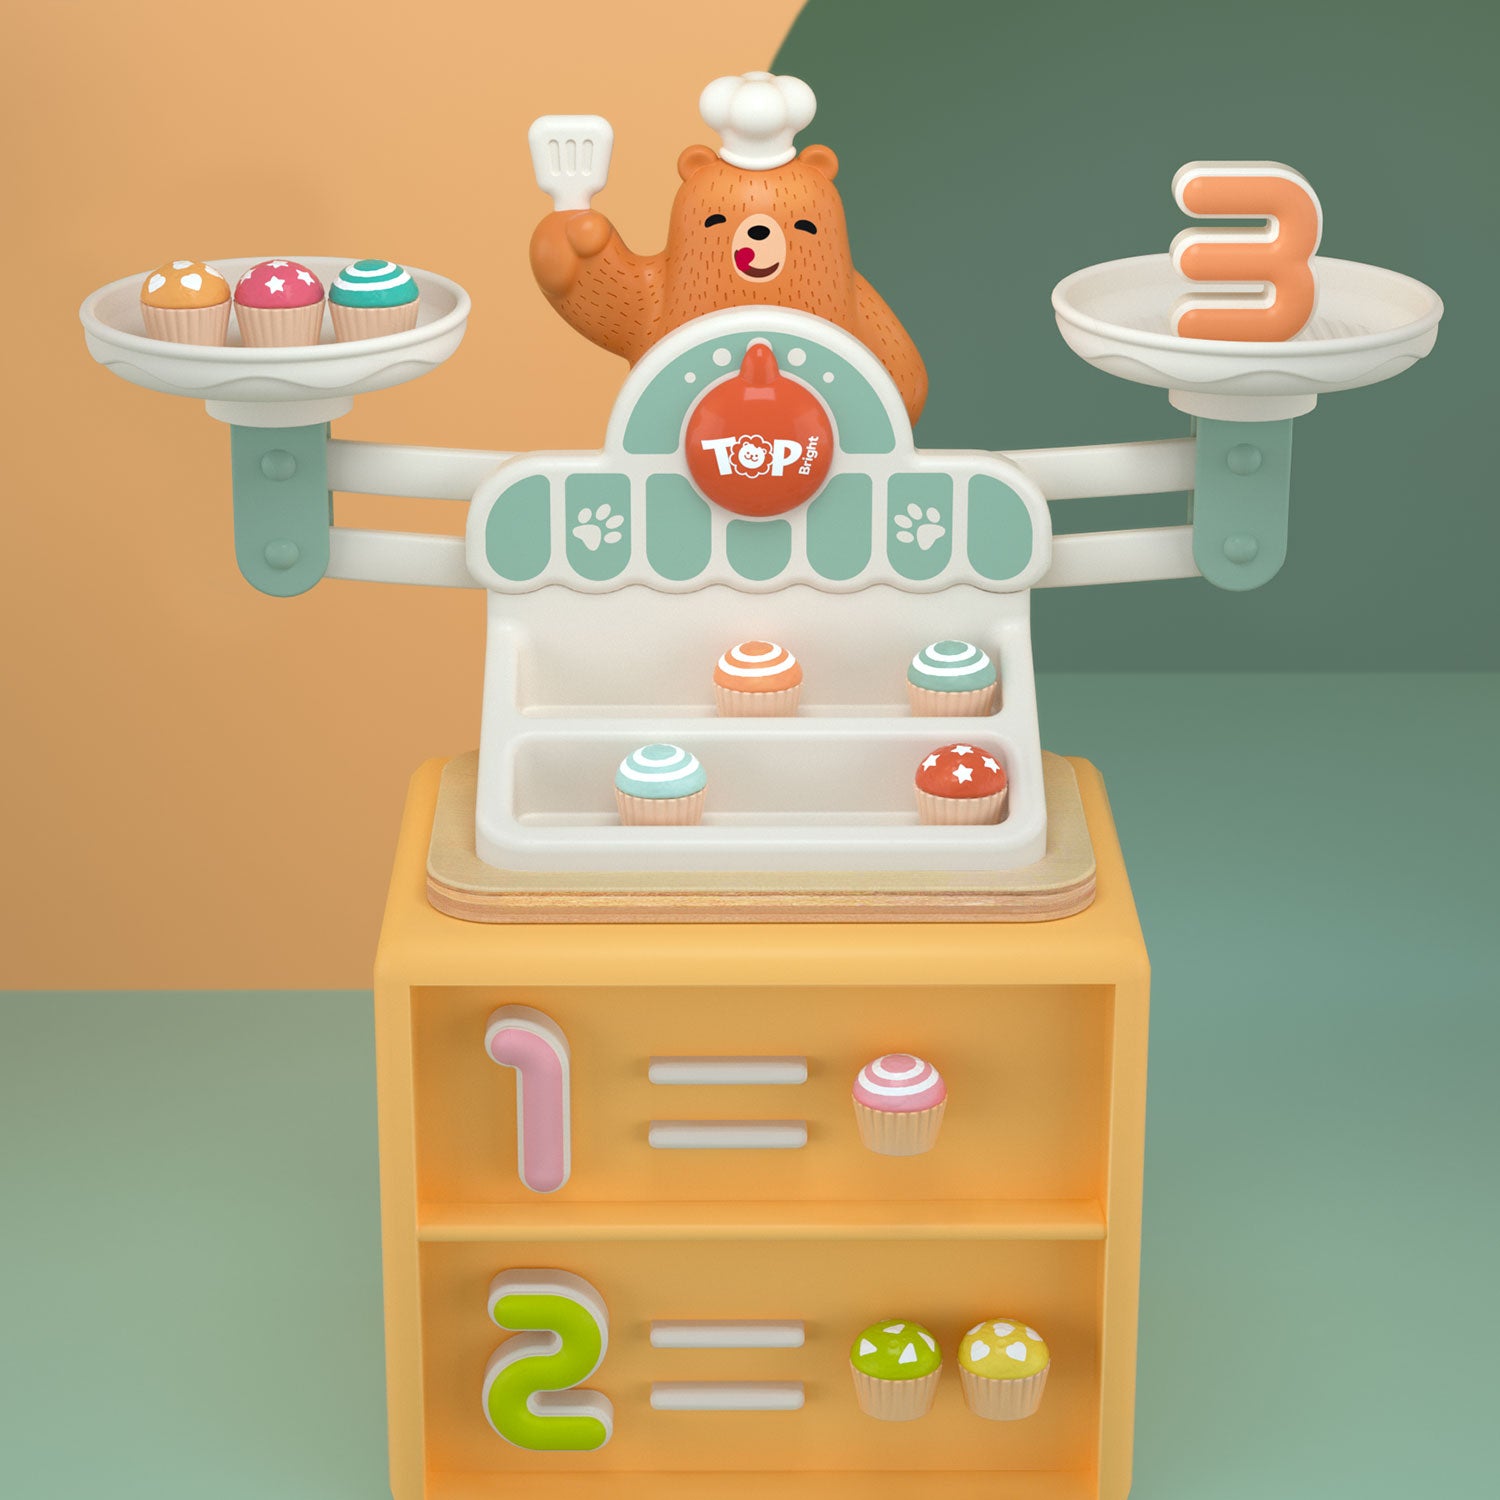 Yummy Bear 123 Scale - Teach Your Kids To Use A Scale! - Weight balance